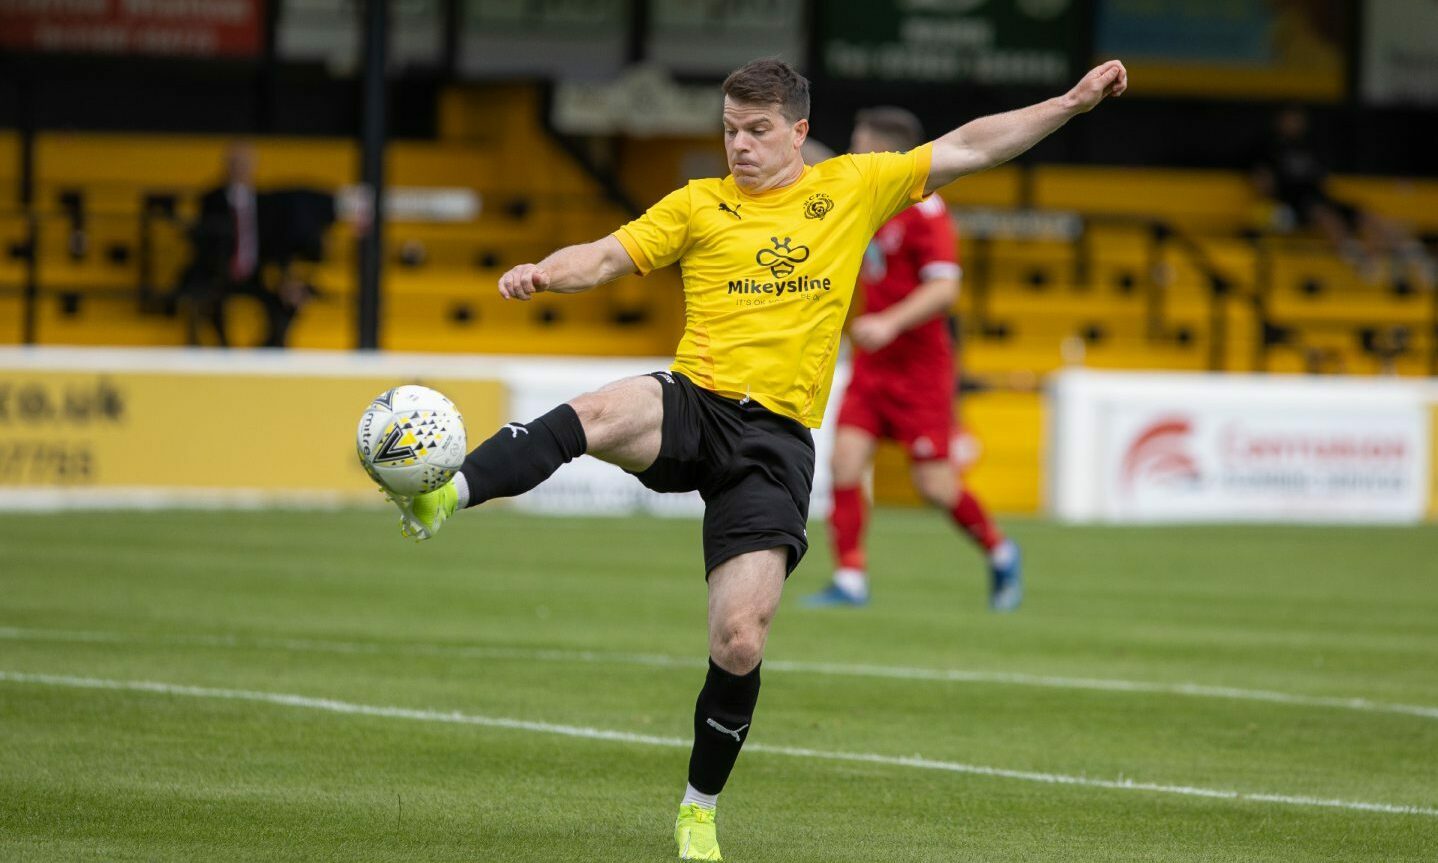 Conor Gethins is staying with Nairn County for next season.